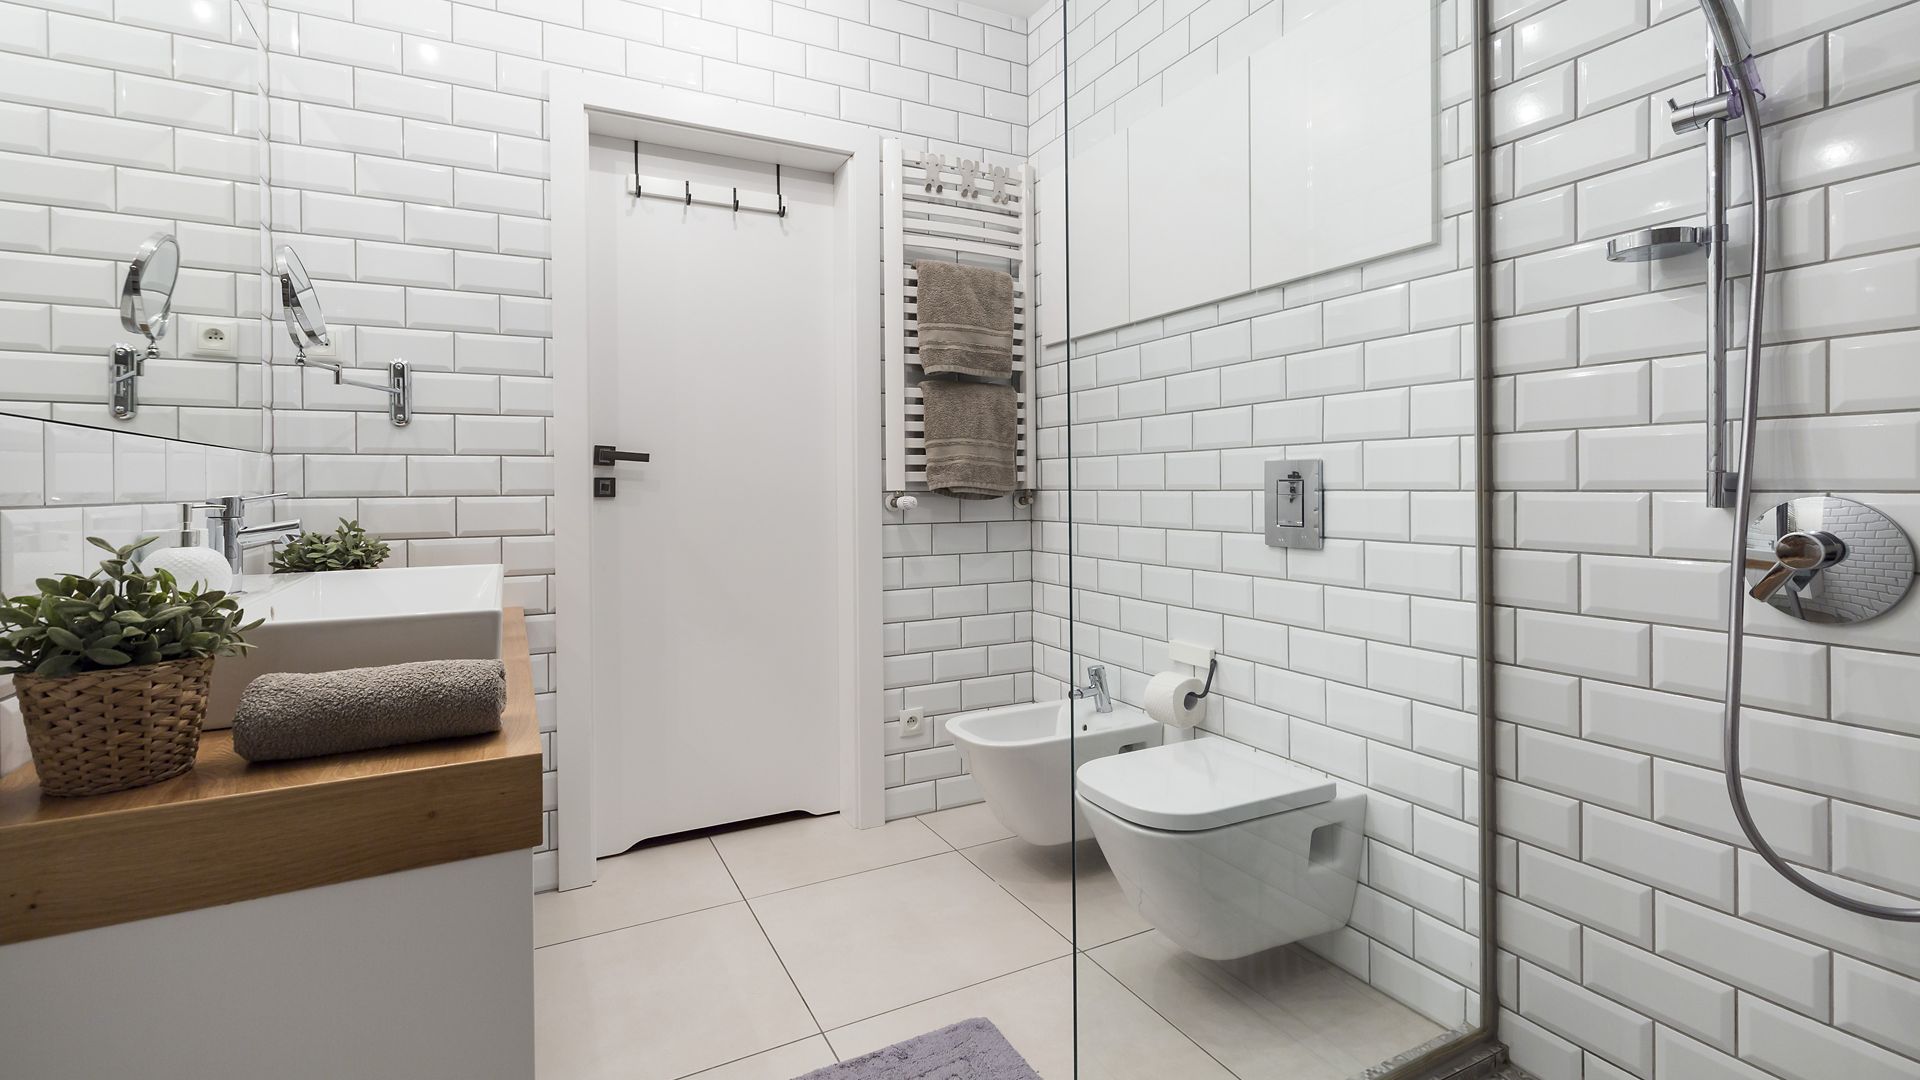 Where to use product guideline for your bathroom.